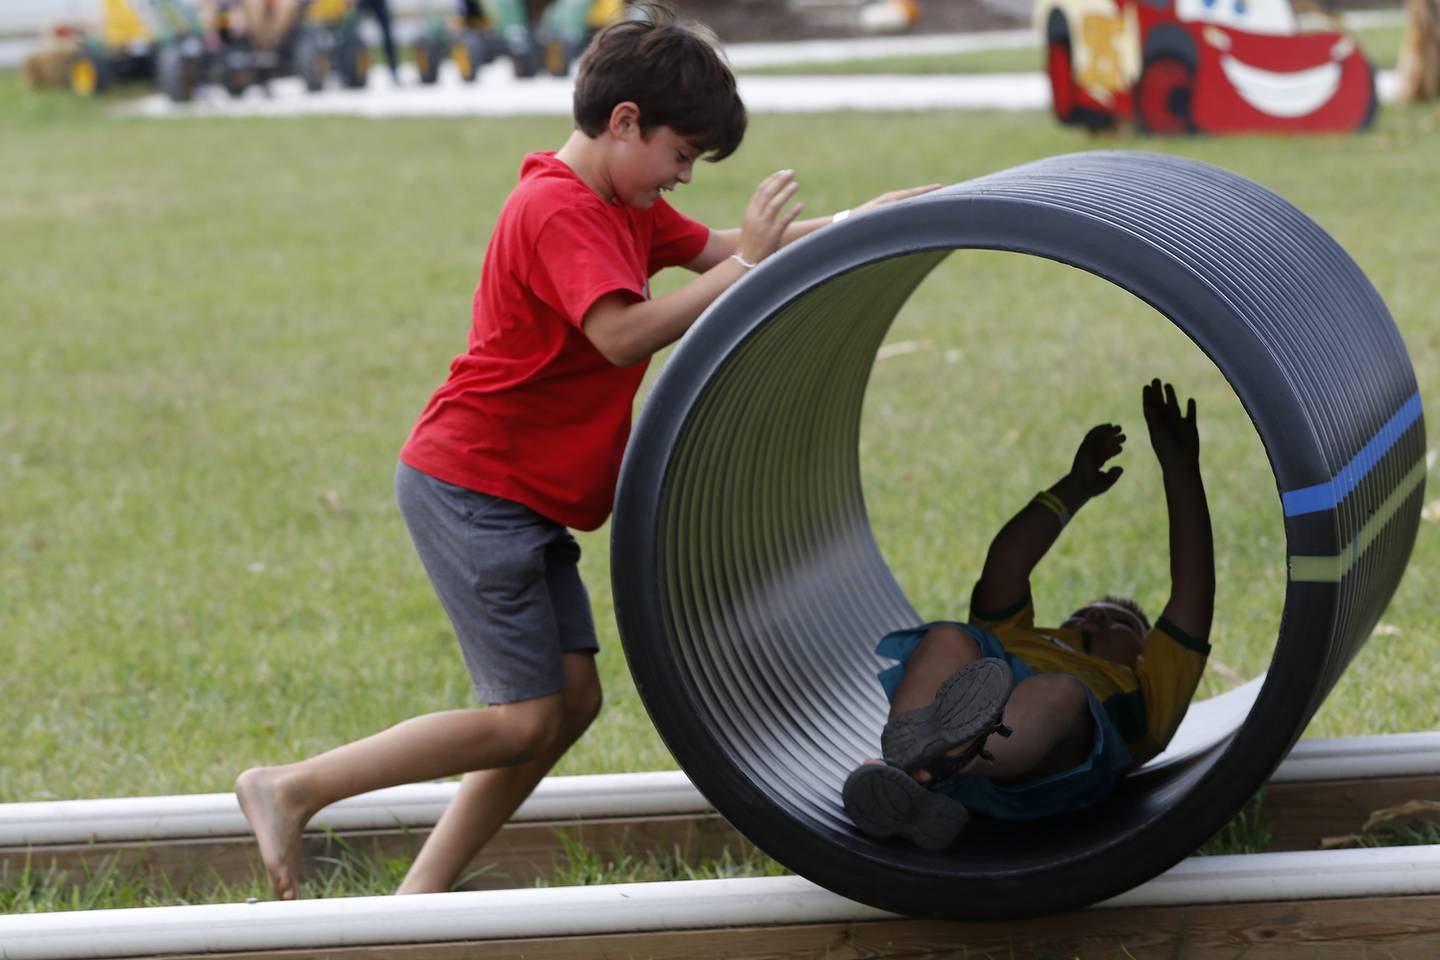 Noah Negrete, 9, of St. Charles, left, pushes Dmitri Intzekiotis, 2, of Huntley, in a tube on tracks during the Fall on the Farm event at Tom's Market on Saturday, Oct. 2, 2021 in Huntley.  The month-long event began on Friday and will conclude Oct. 31.